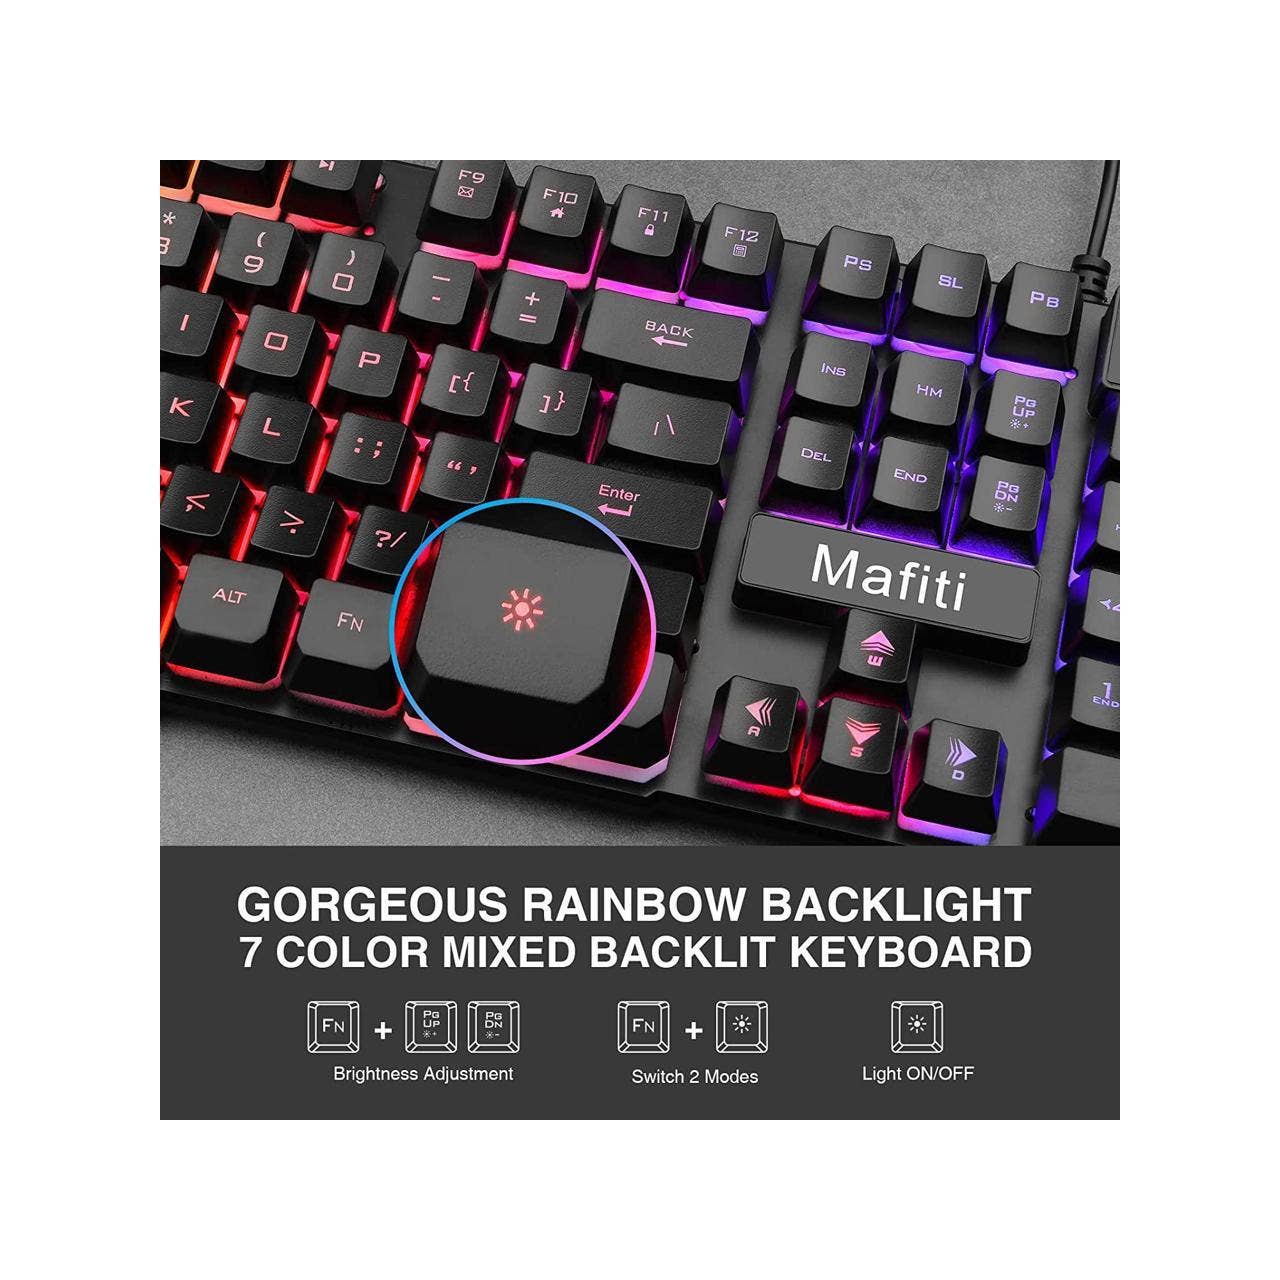 NEW Mafiti Colorful Backlit Gaming Keyboard with mouse